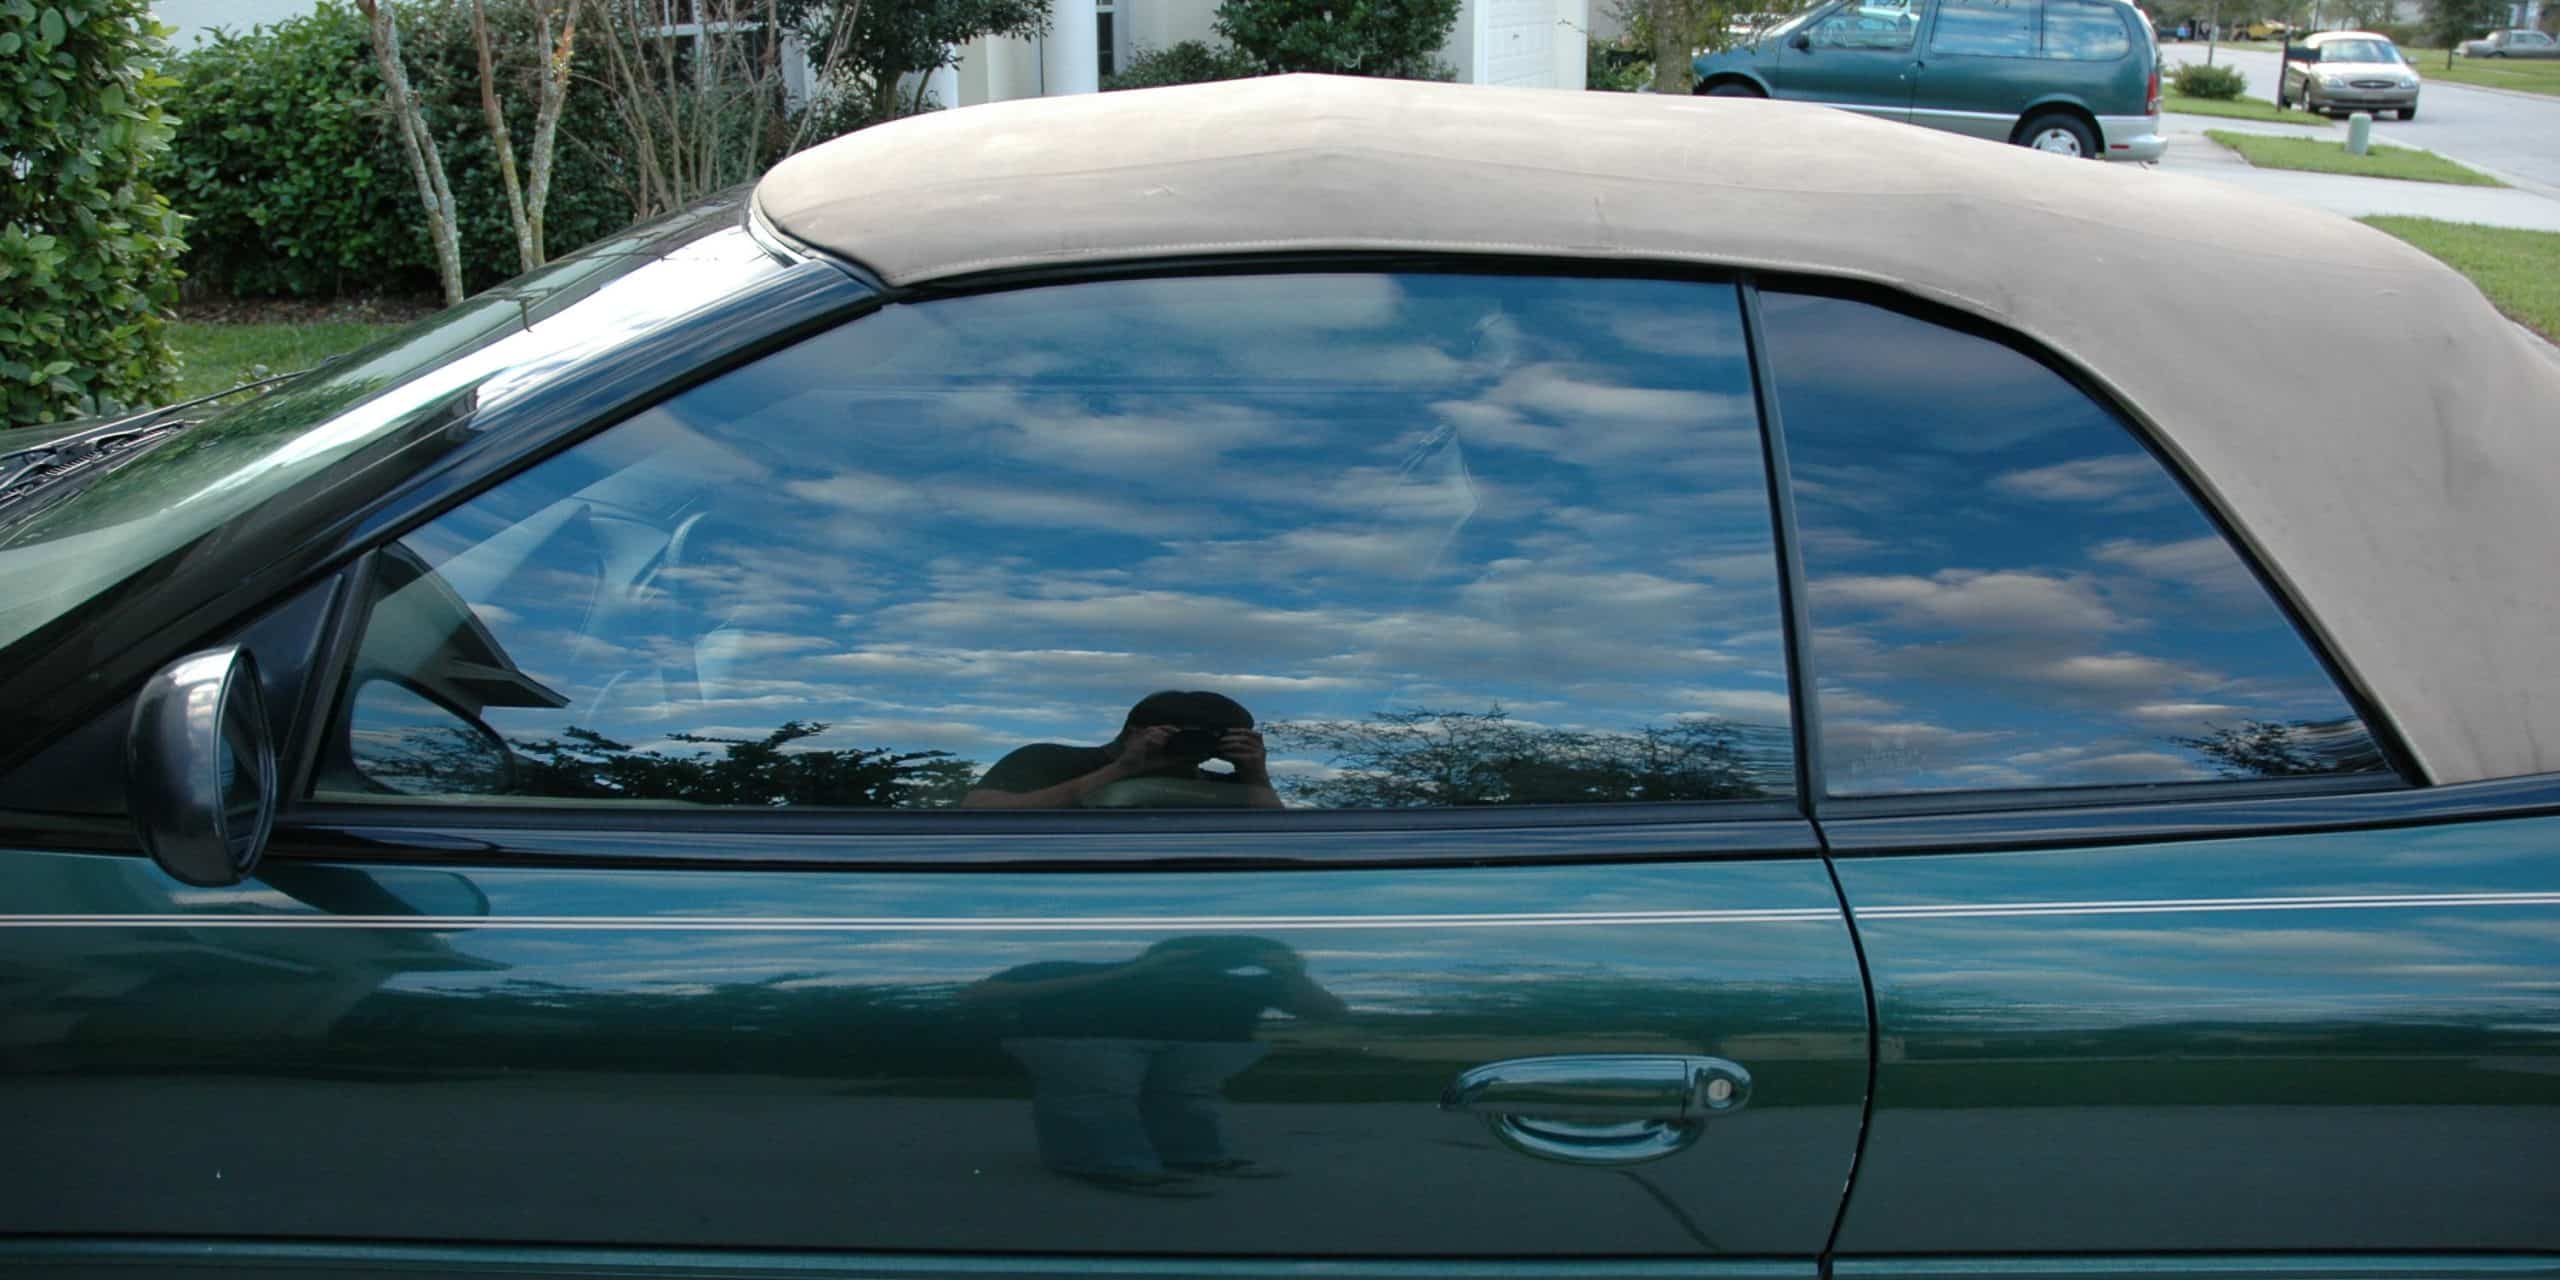 When Should I Get My Car Windows Tinted?